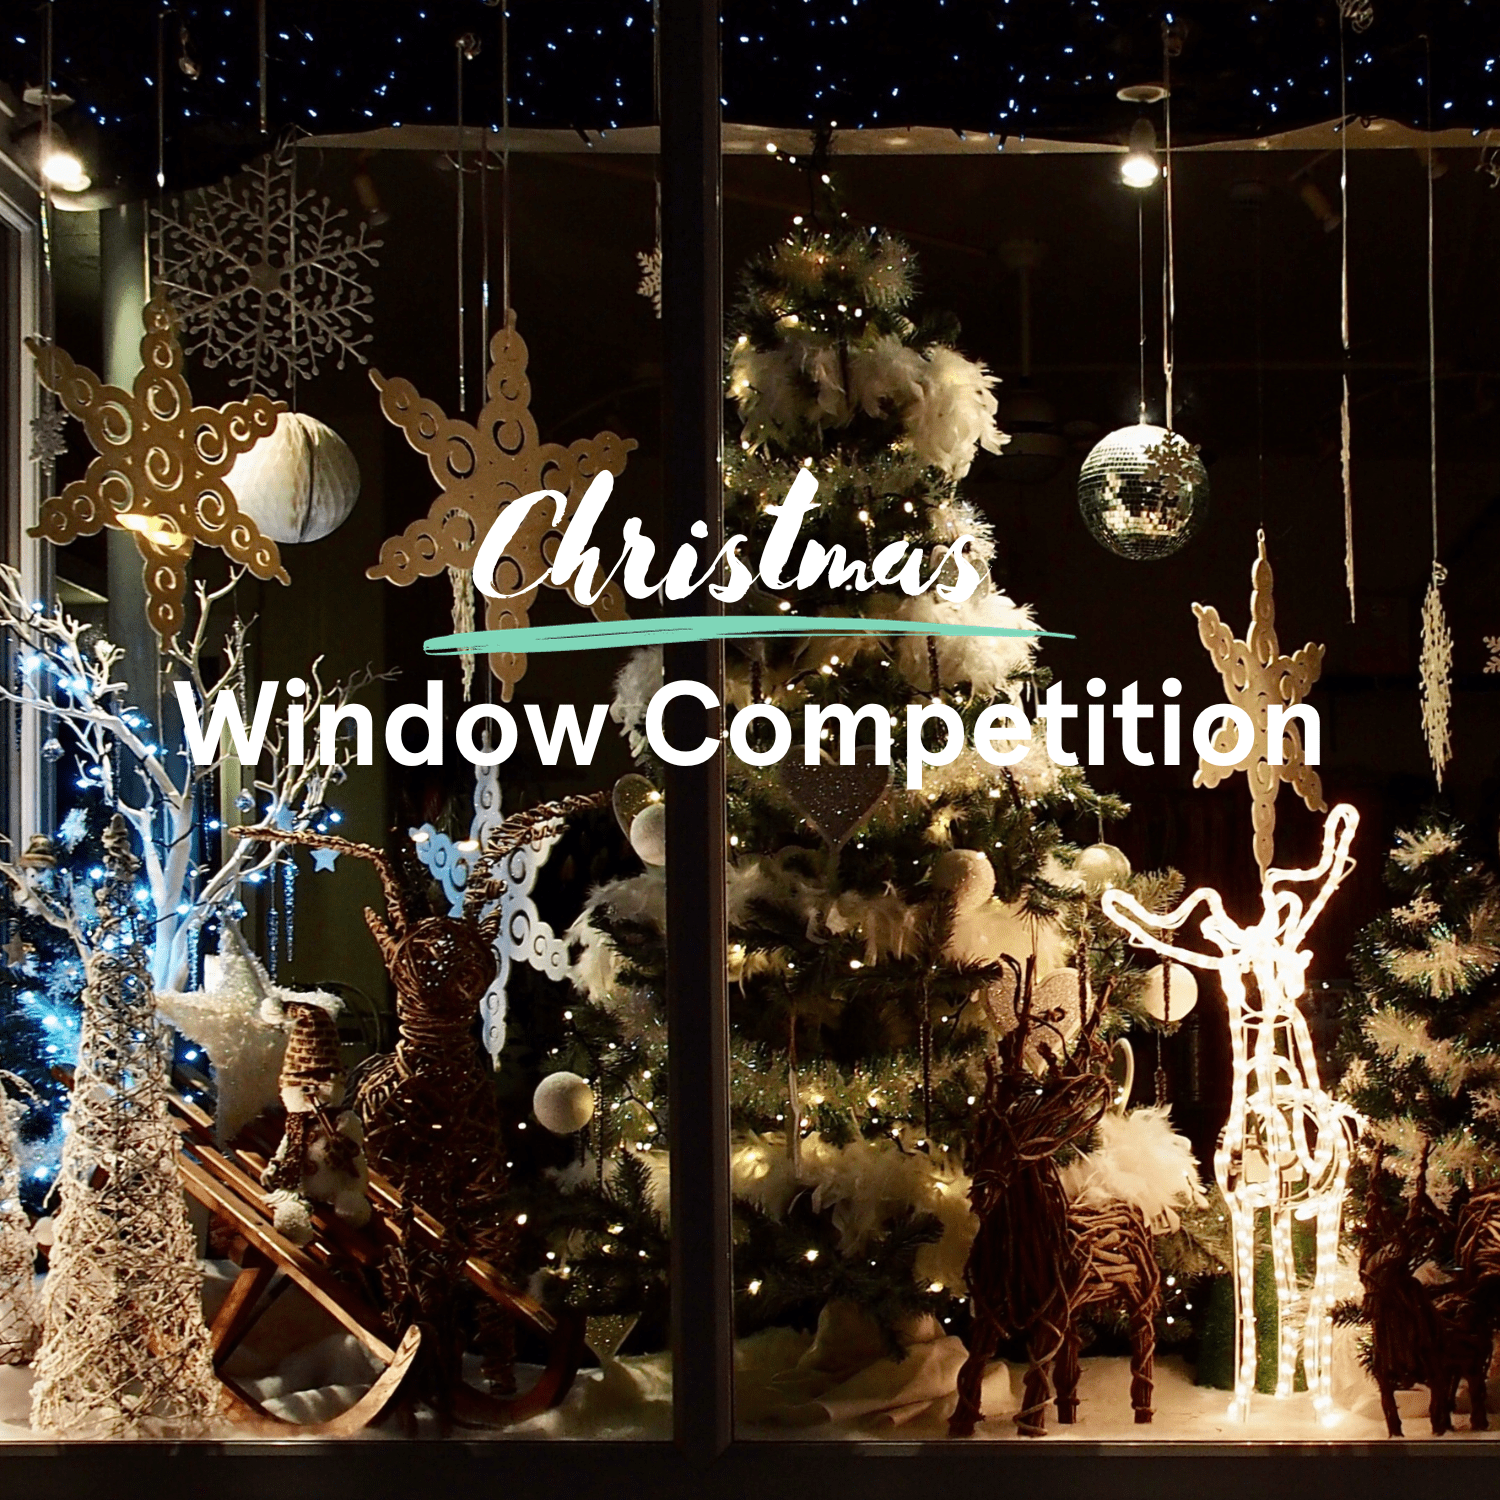 Voting for your favourite festive window could win you a prize 